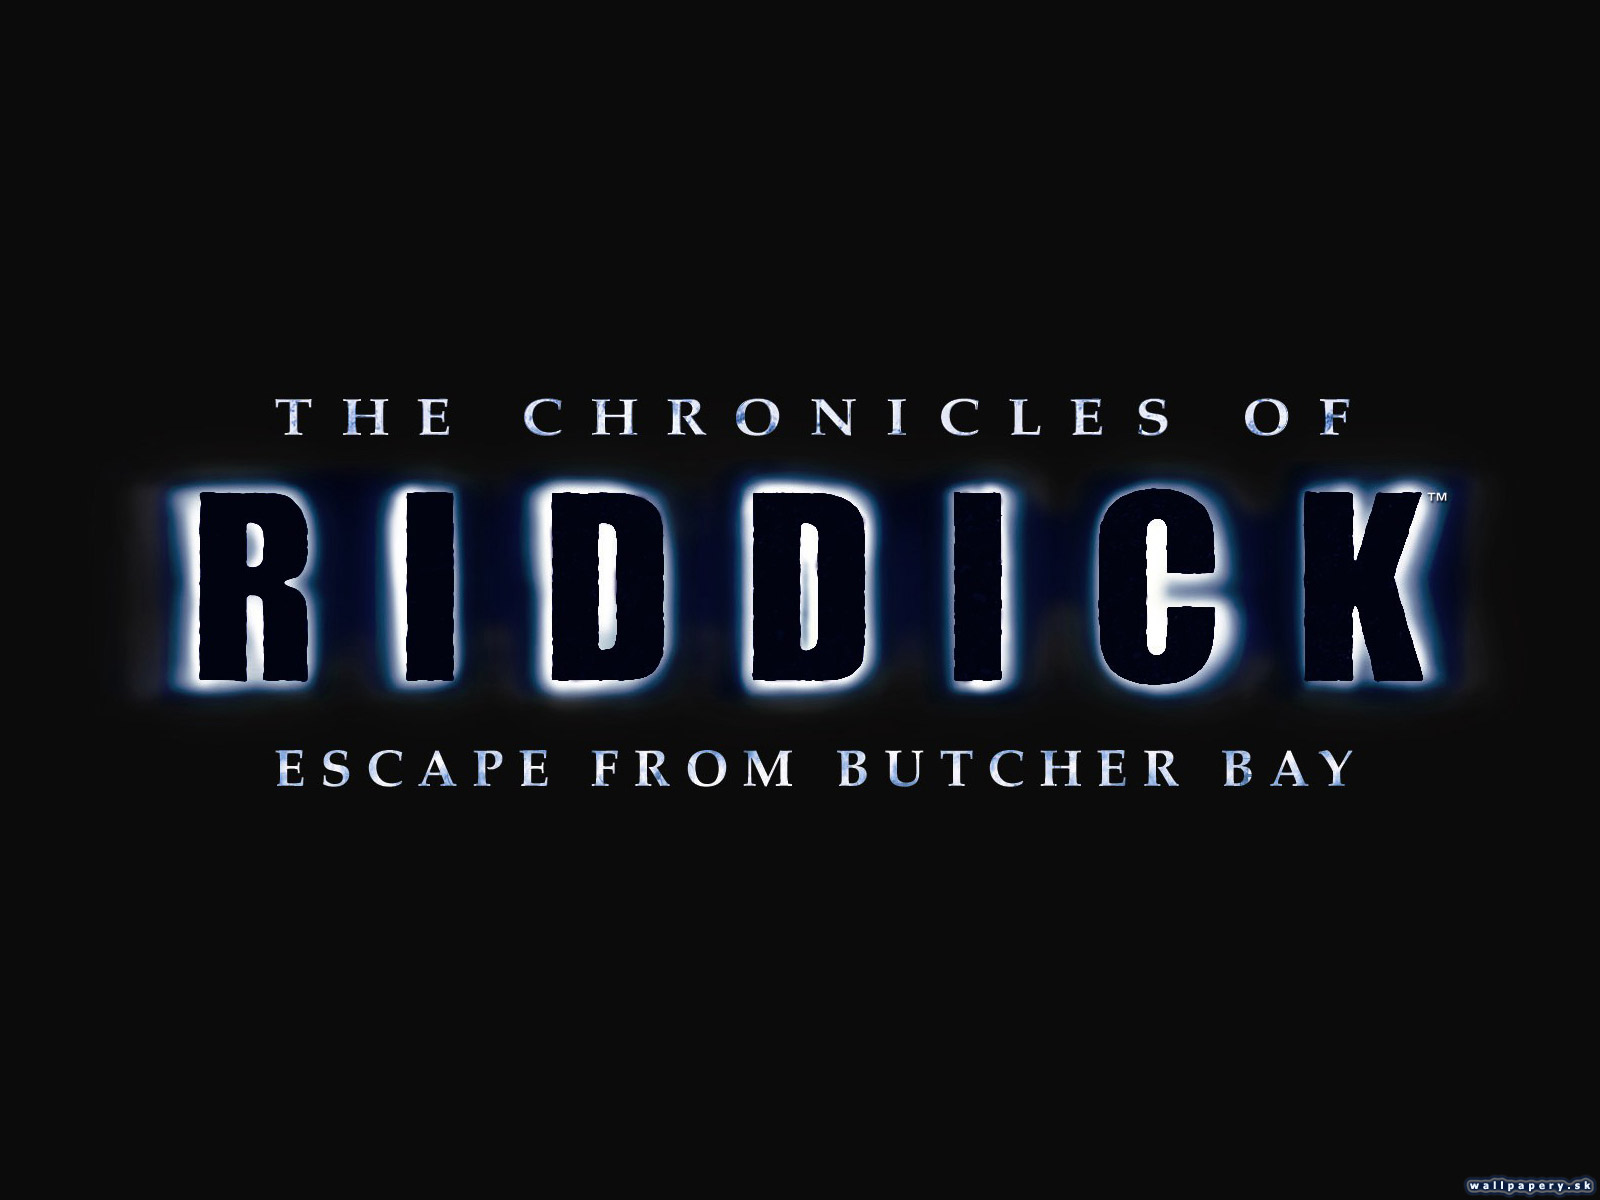 The Chronicles of Riddick: Escape From Butcher Bay - wallpaper 8